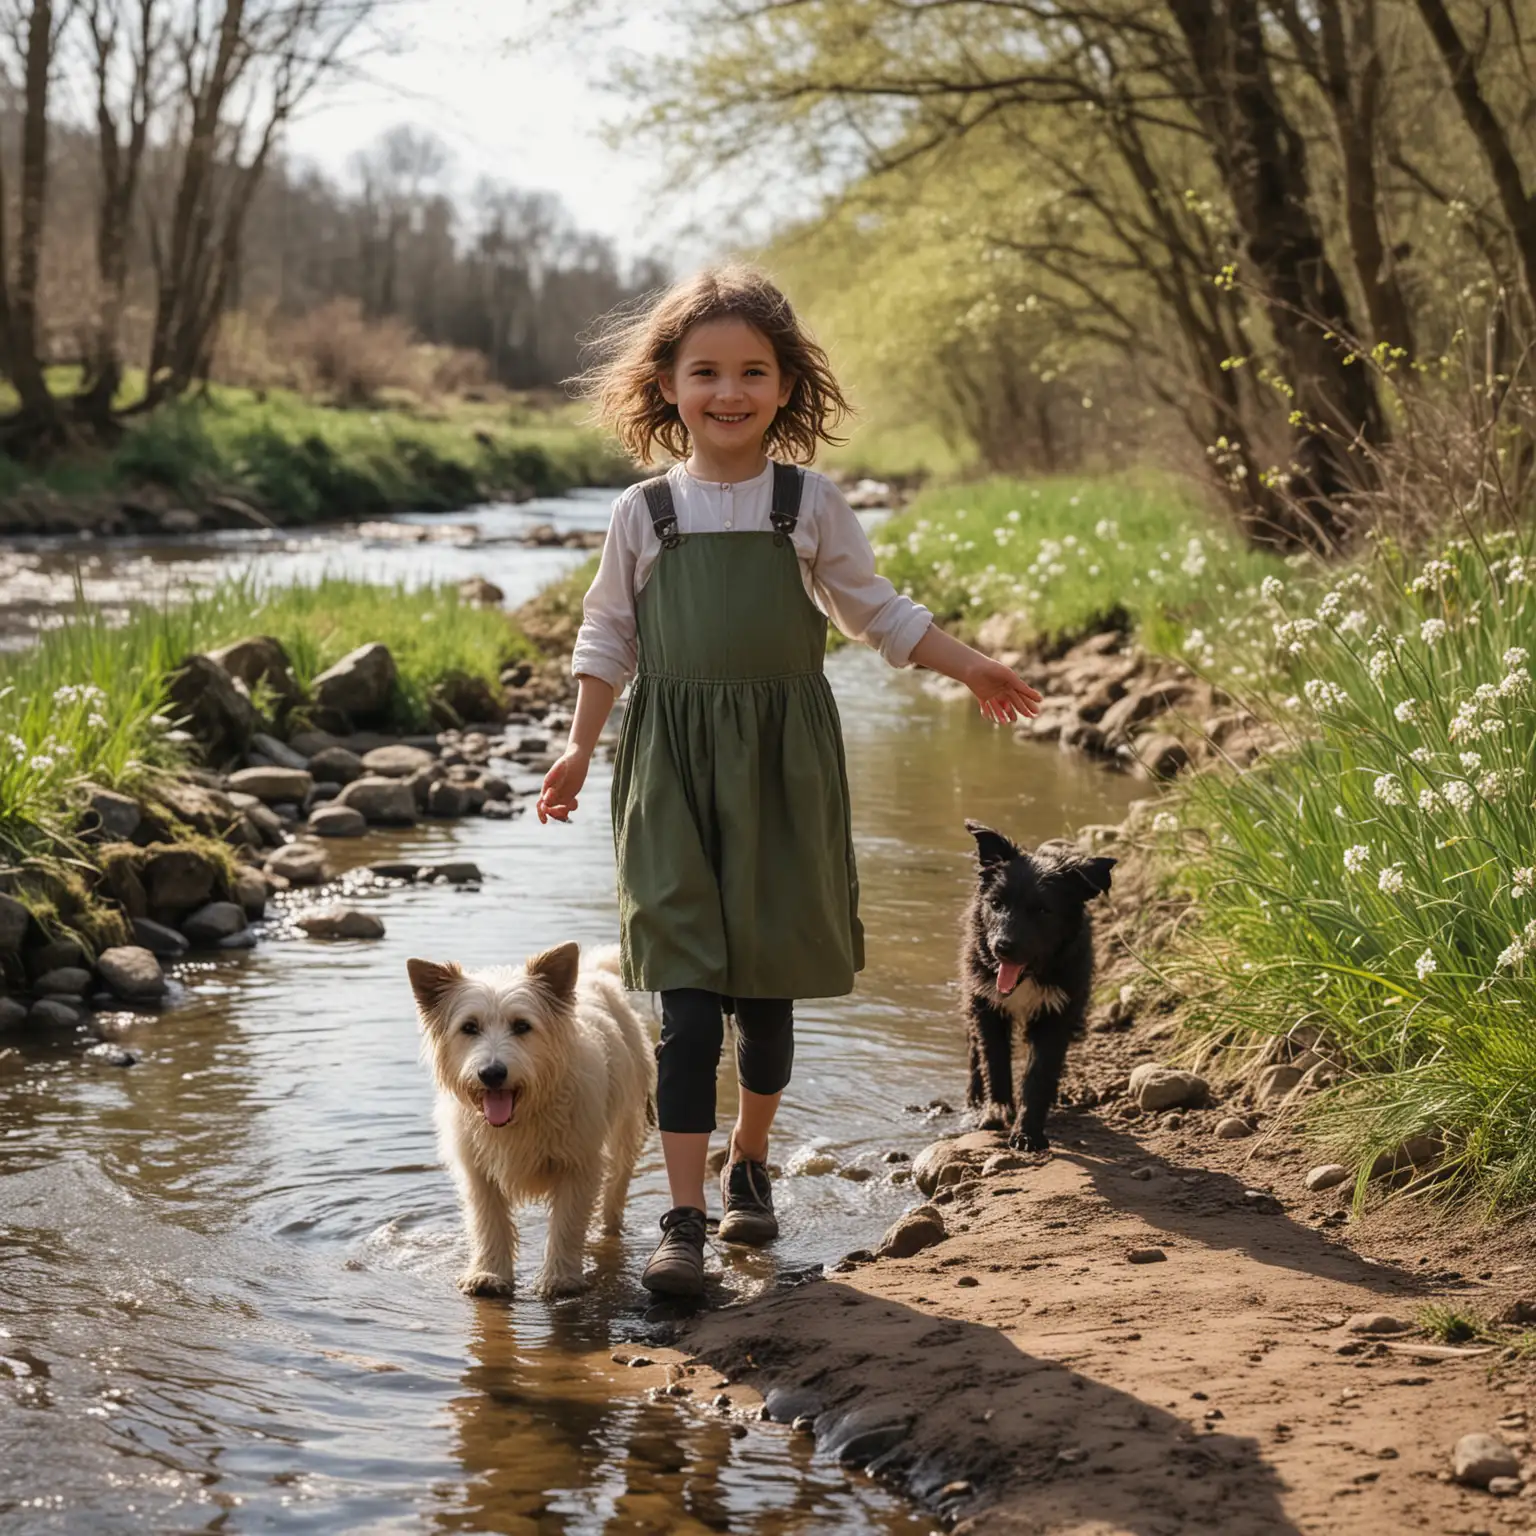 Spring-Afternoon-Smiling-Girl-and-Shepherd-Dog-by-the-River